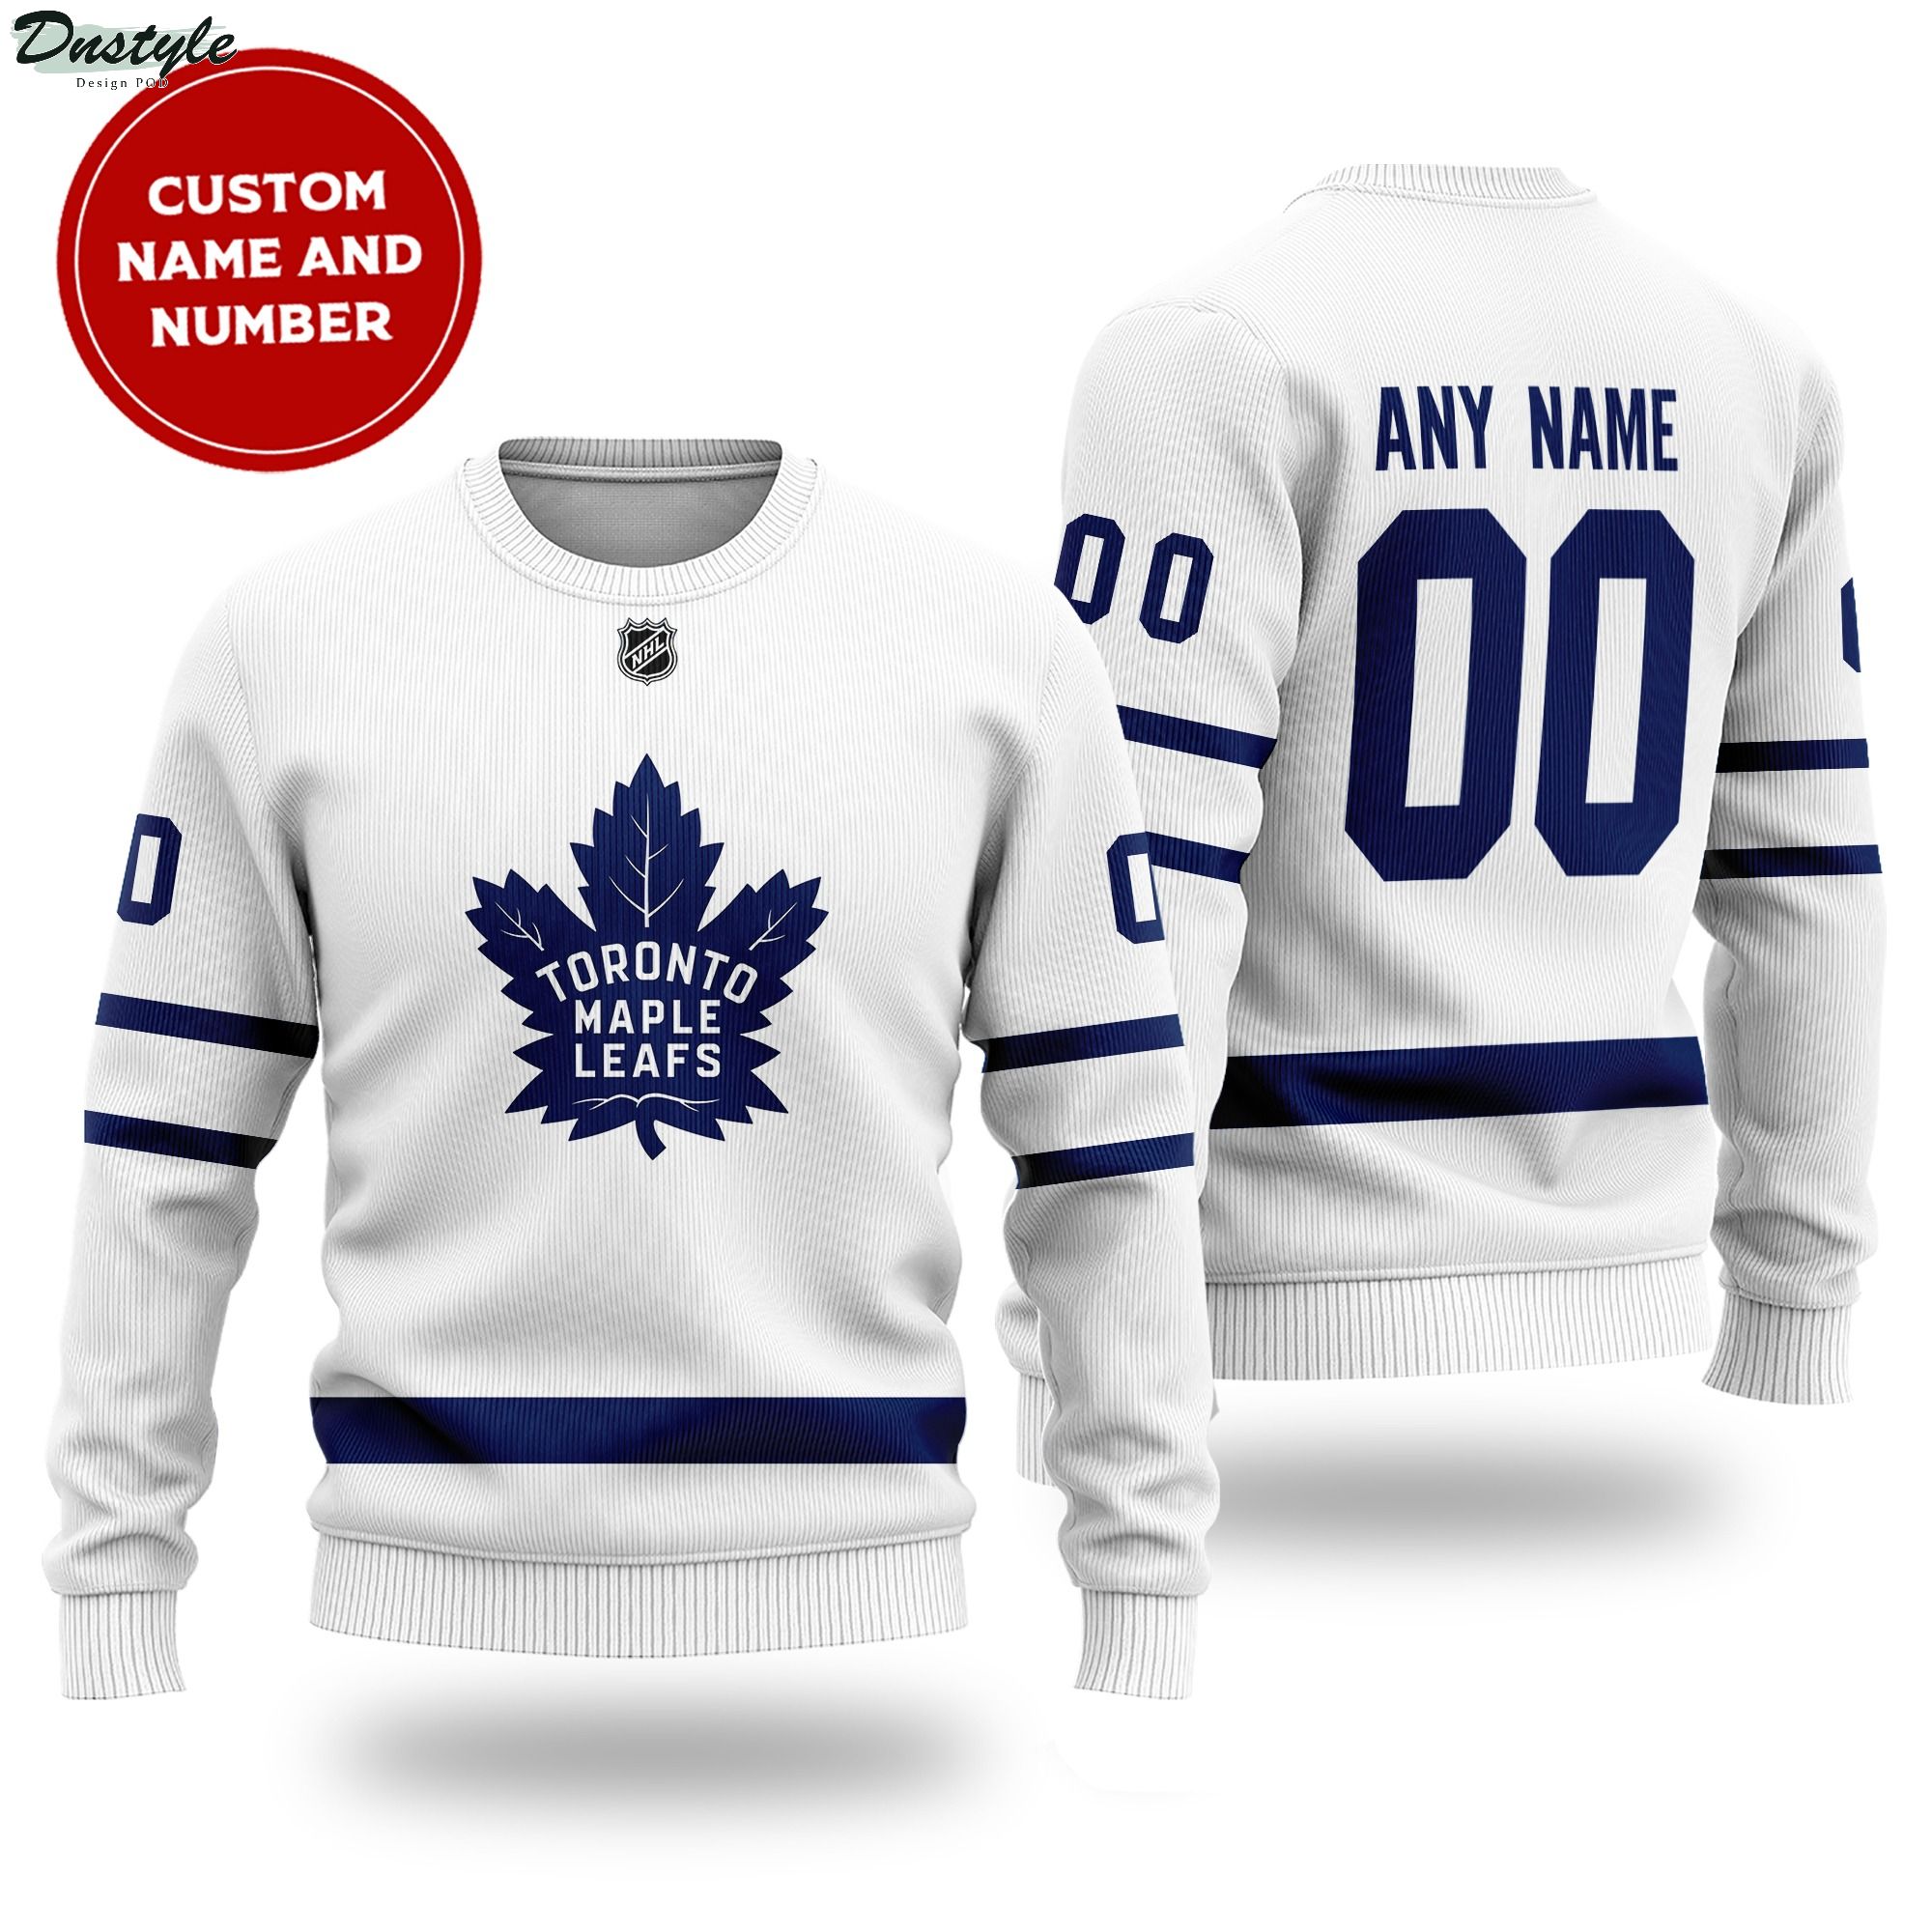 Toronto Maple Leafs NHL custom name and number ugly sweater